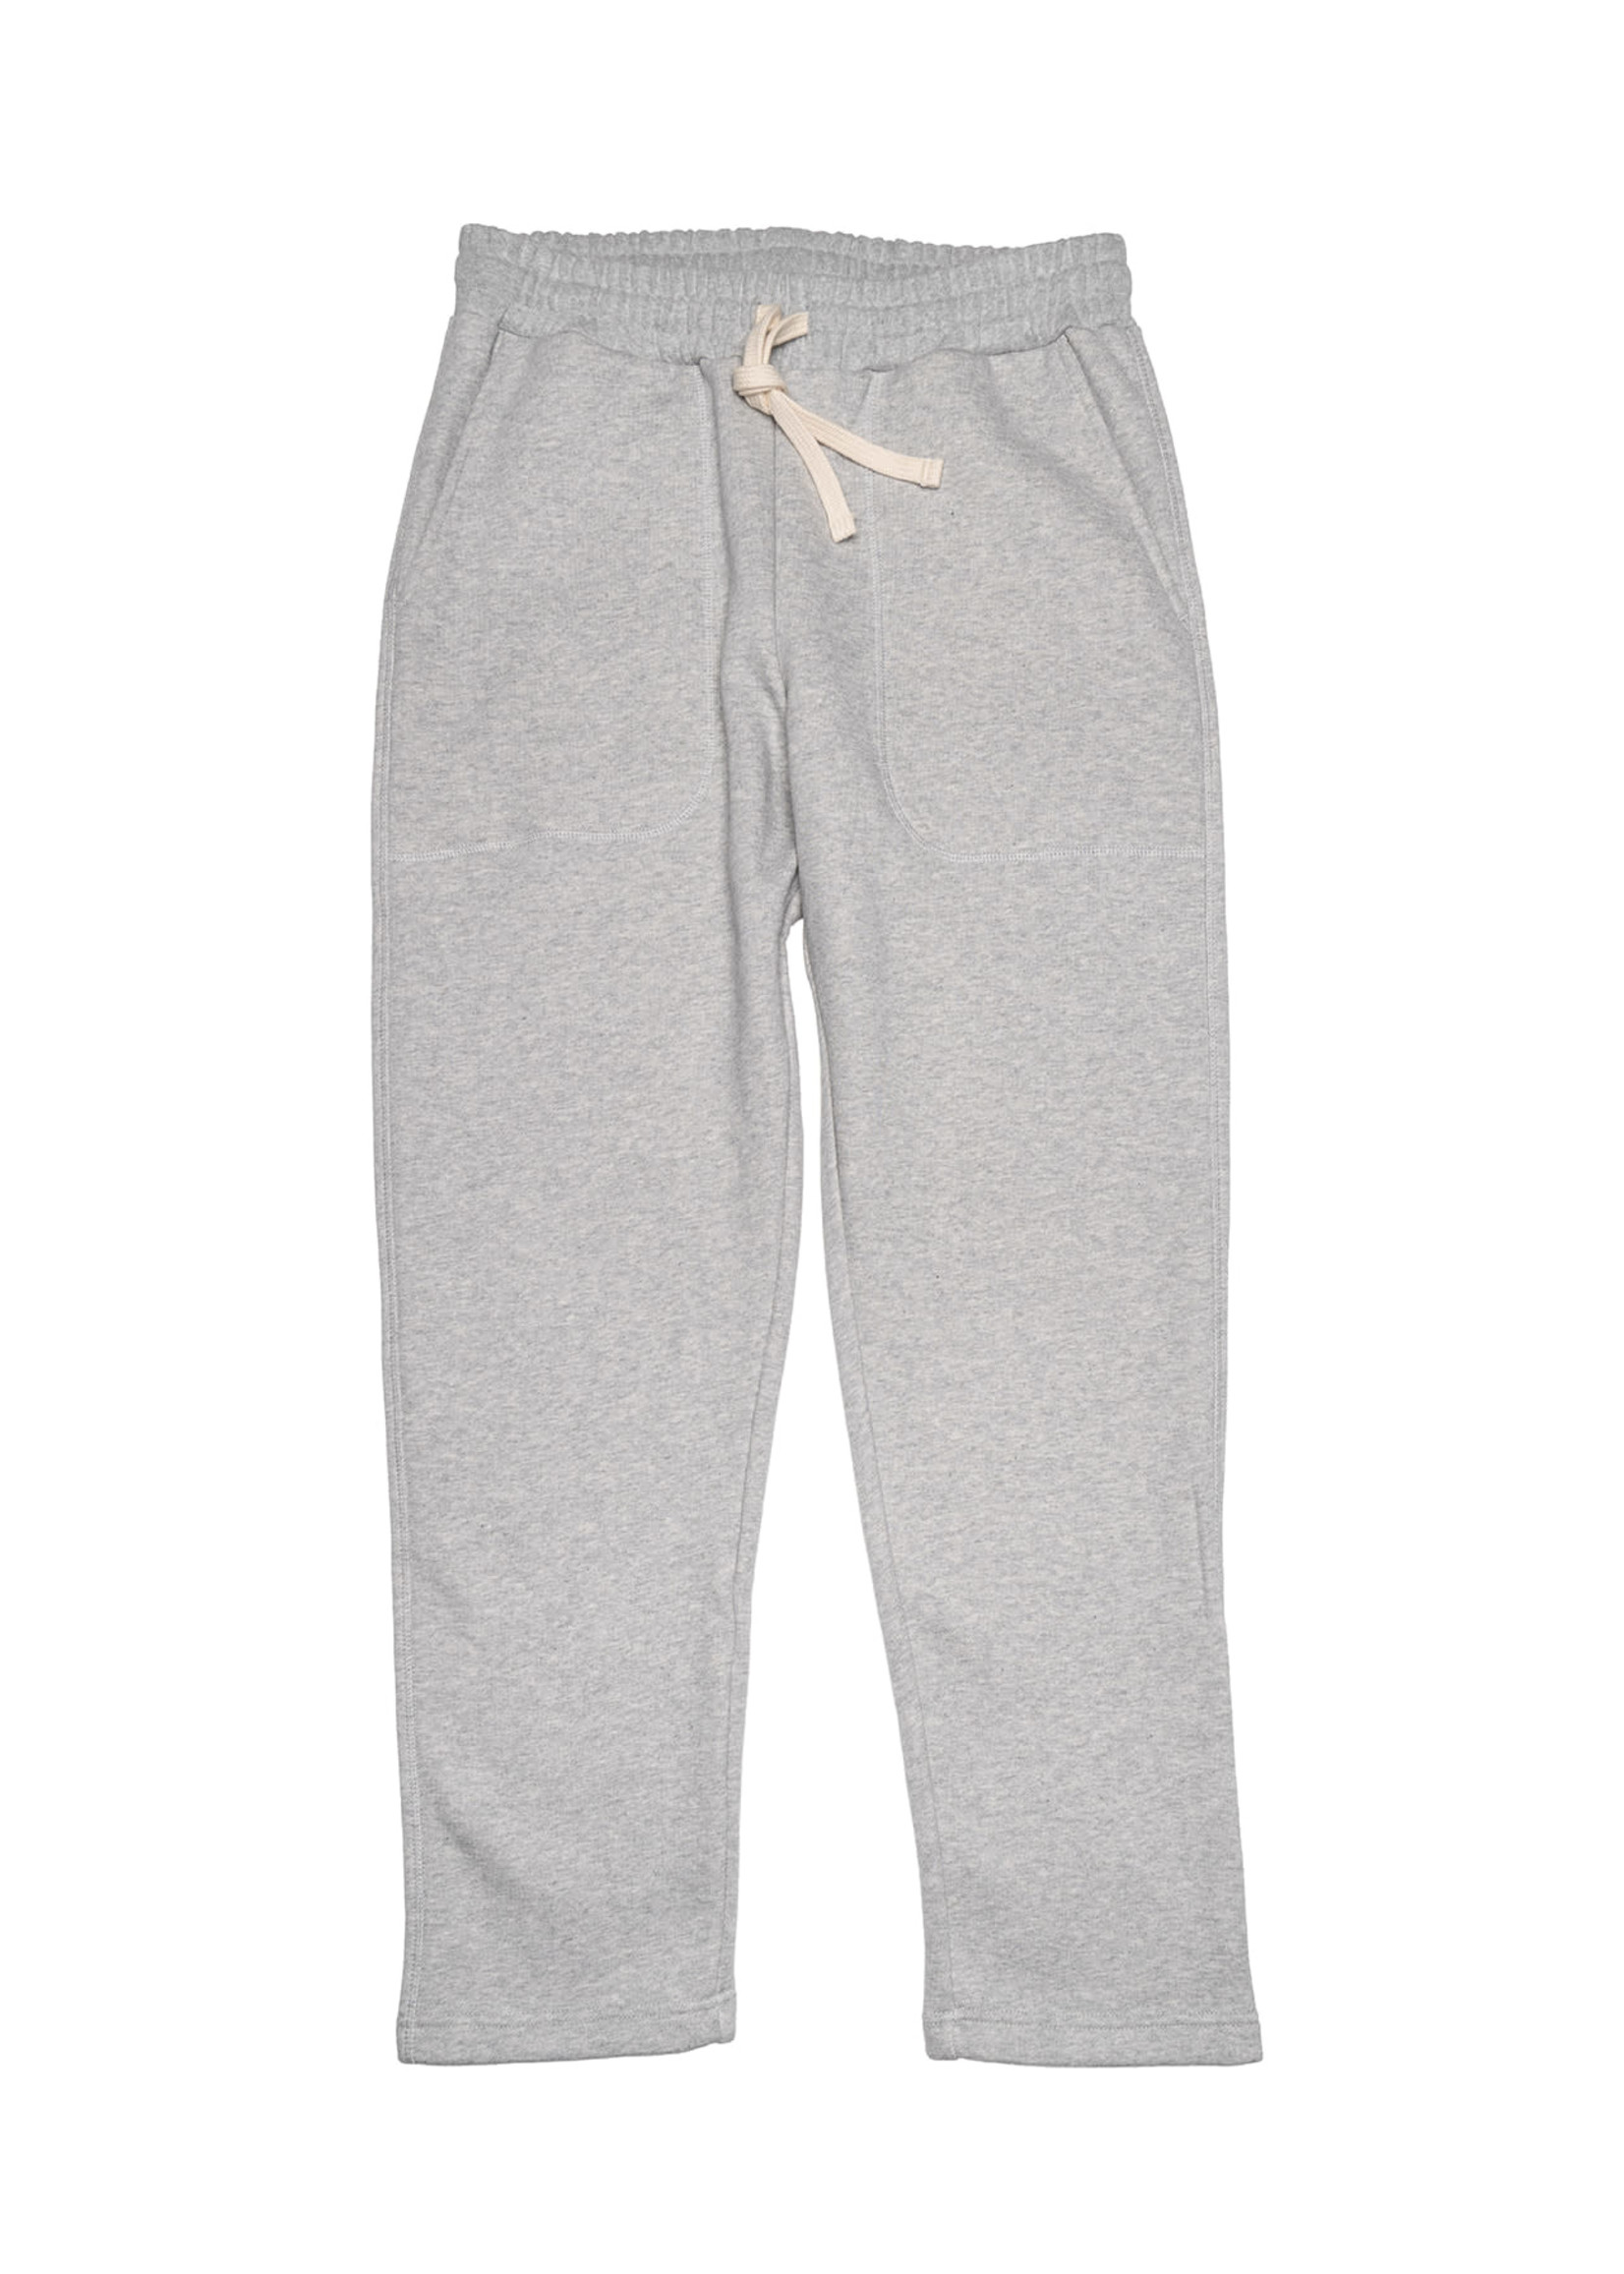 NORSE PROJECTS FALUN CLASSIC SWEATPANT